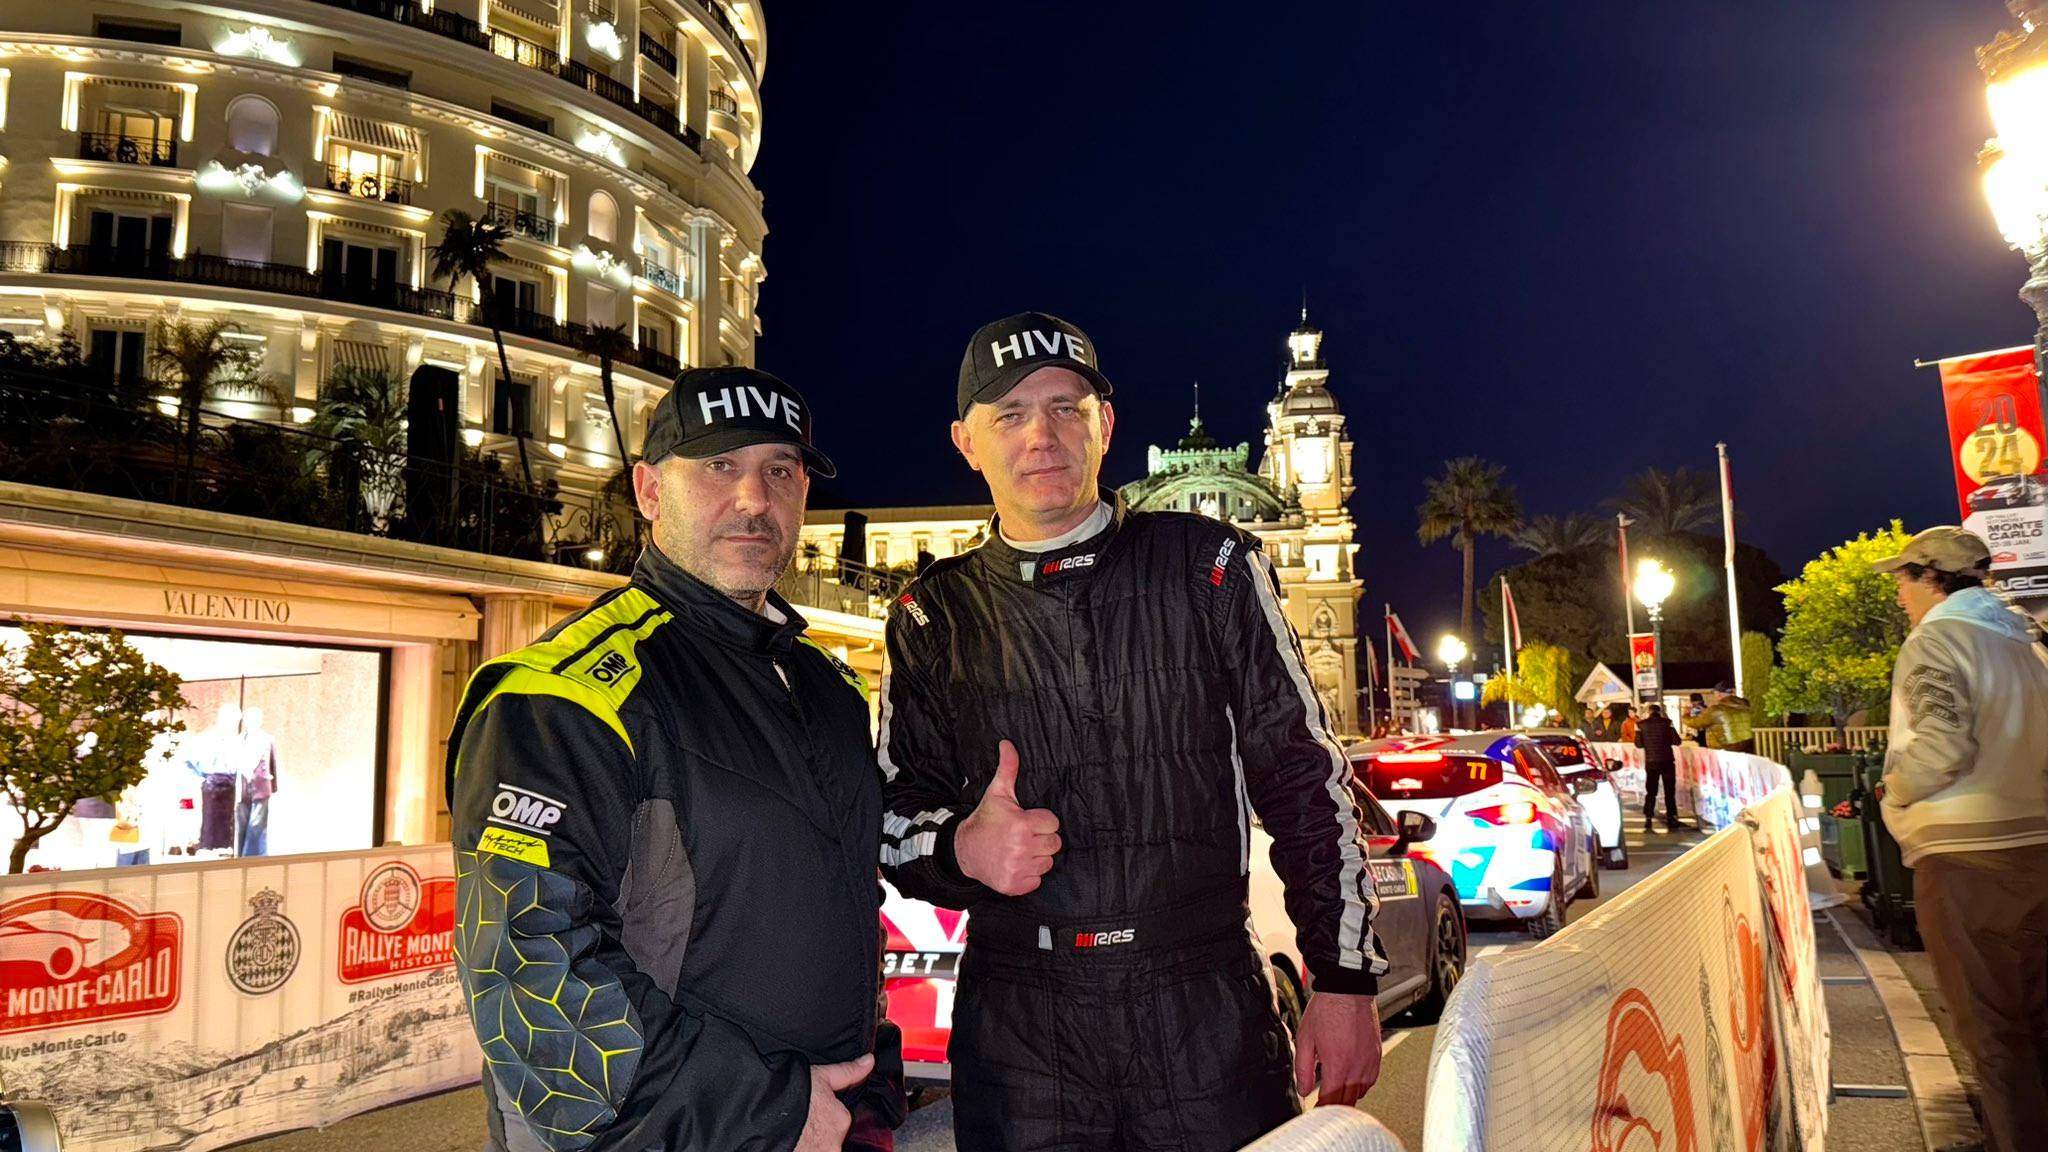 Slaven Šekuljica and Damir Petrović. The Hive rally car driver and co-driver at the opening ceremony for the 2024 Monte Carlo Rally.